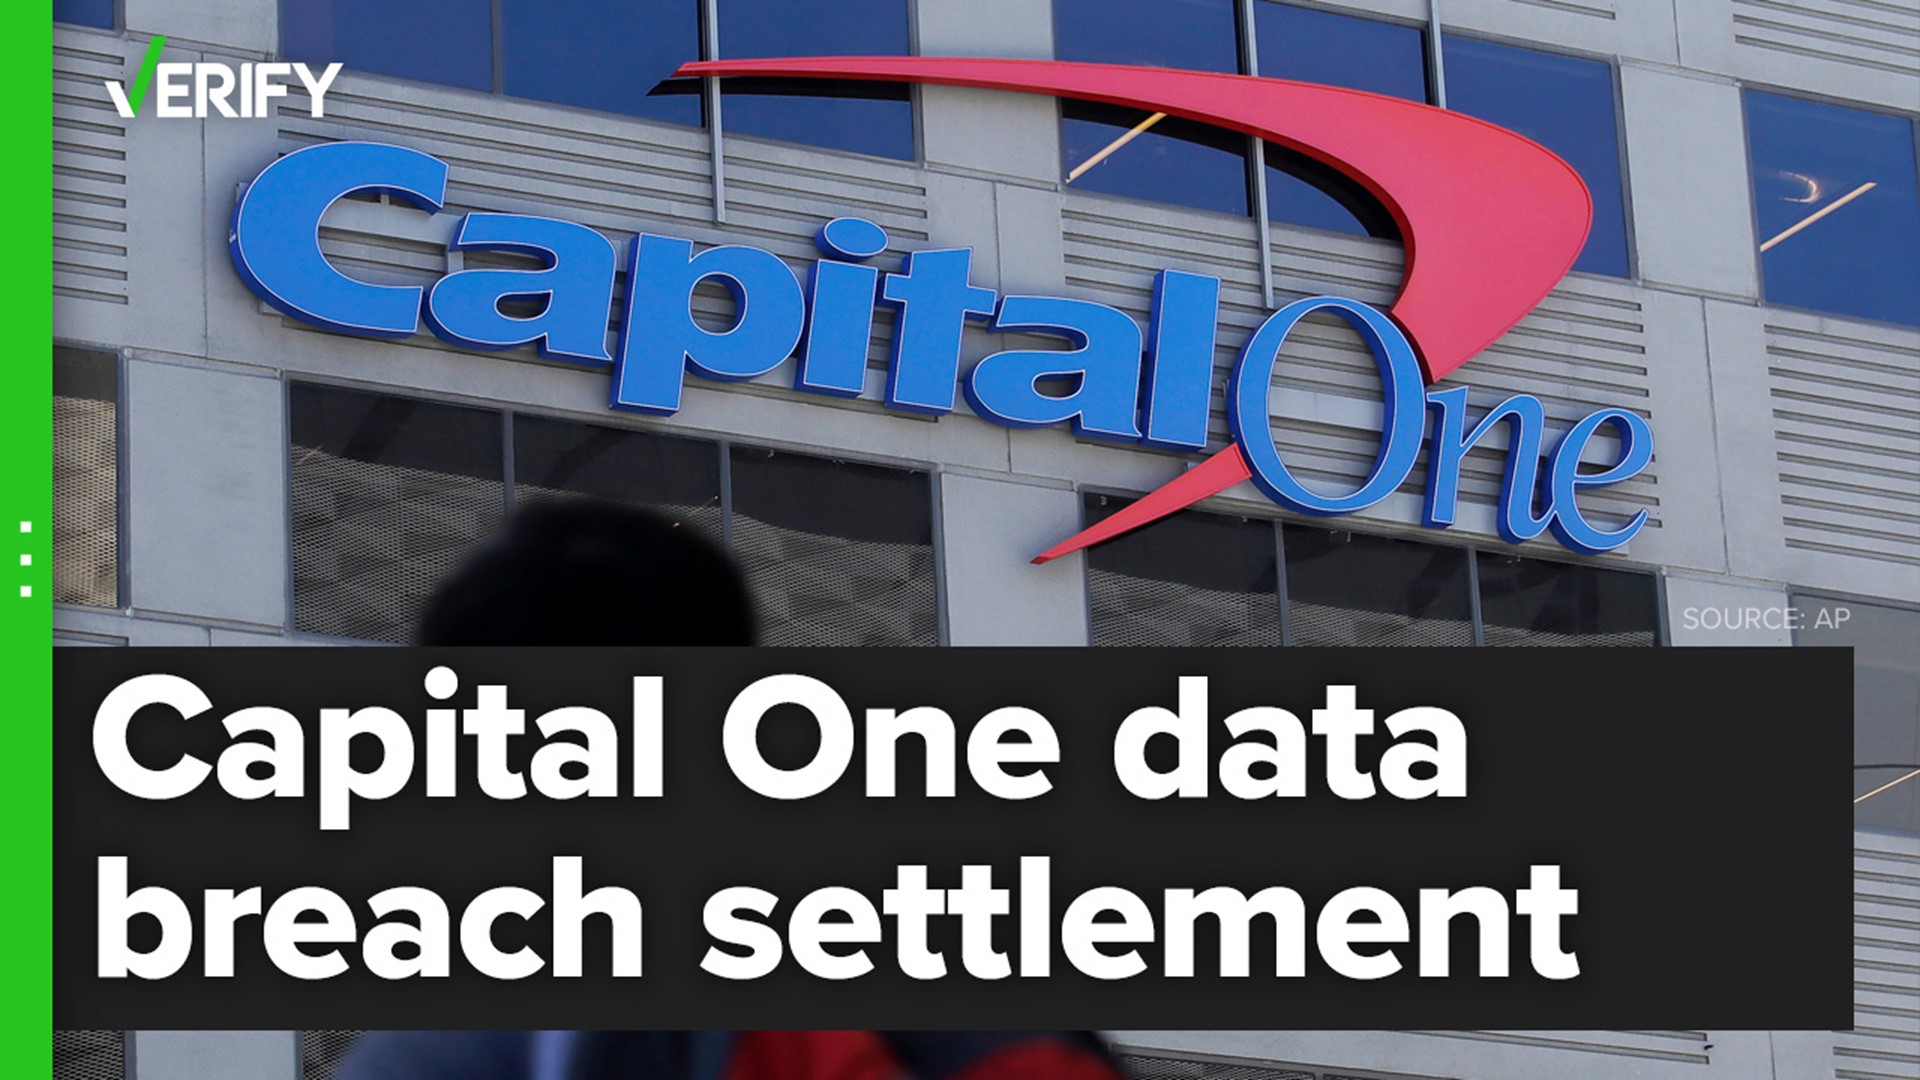 In July 2019, nearly 100 million Capital One credit card customers and applicants were the victims of a cyberattack. A settlement has been preliminarily approved.